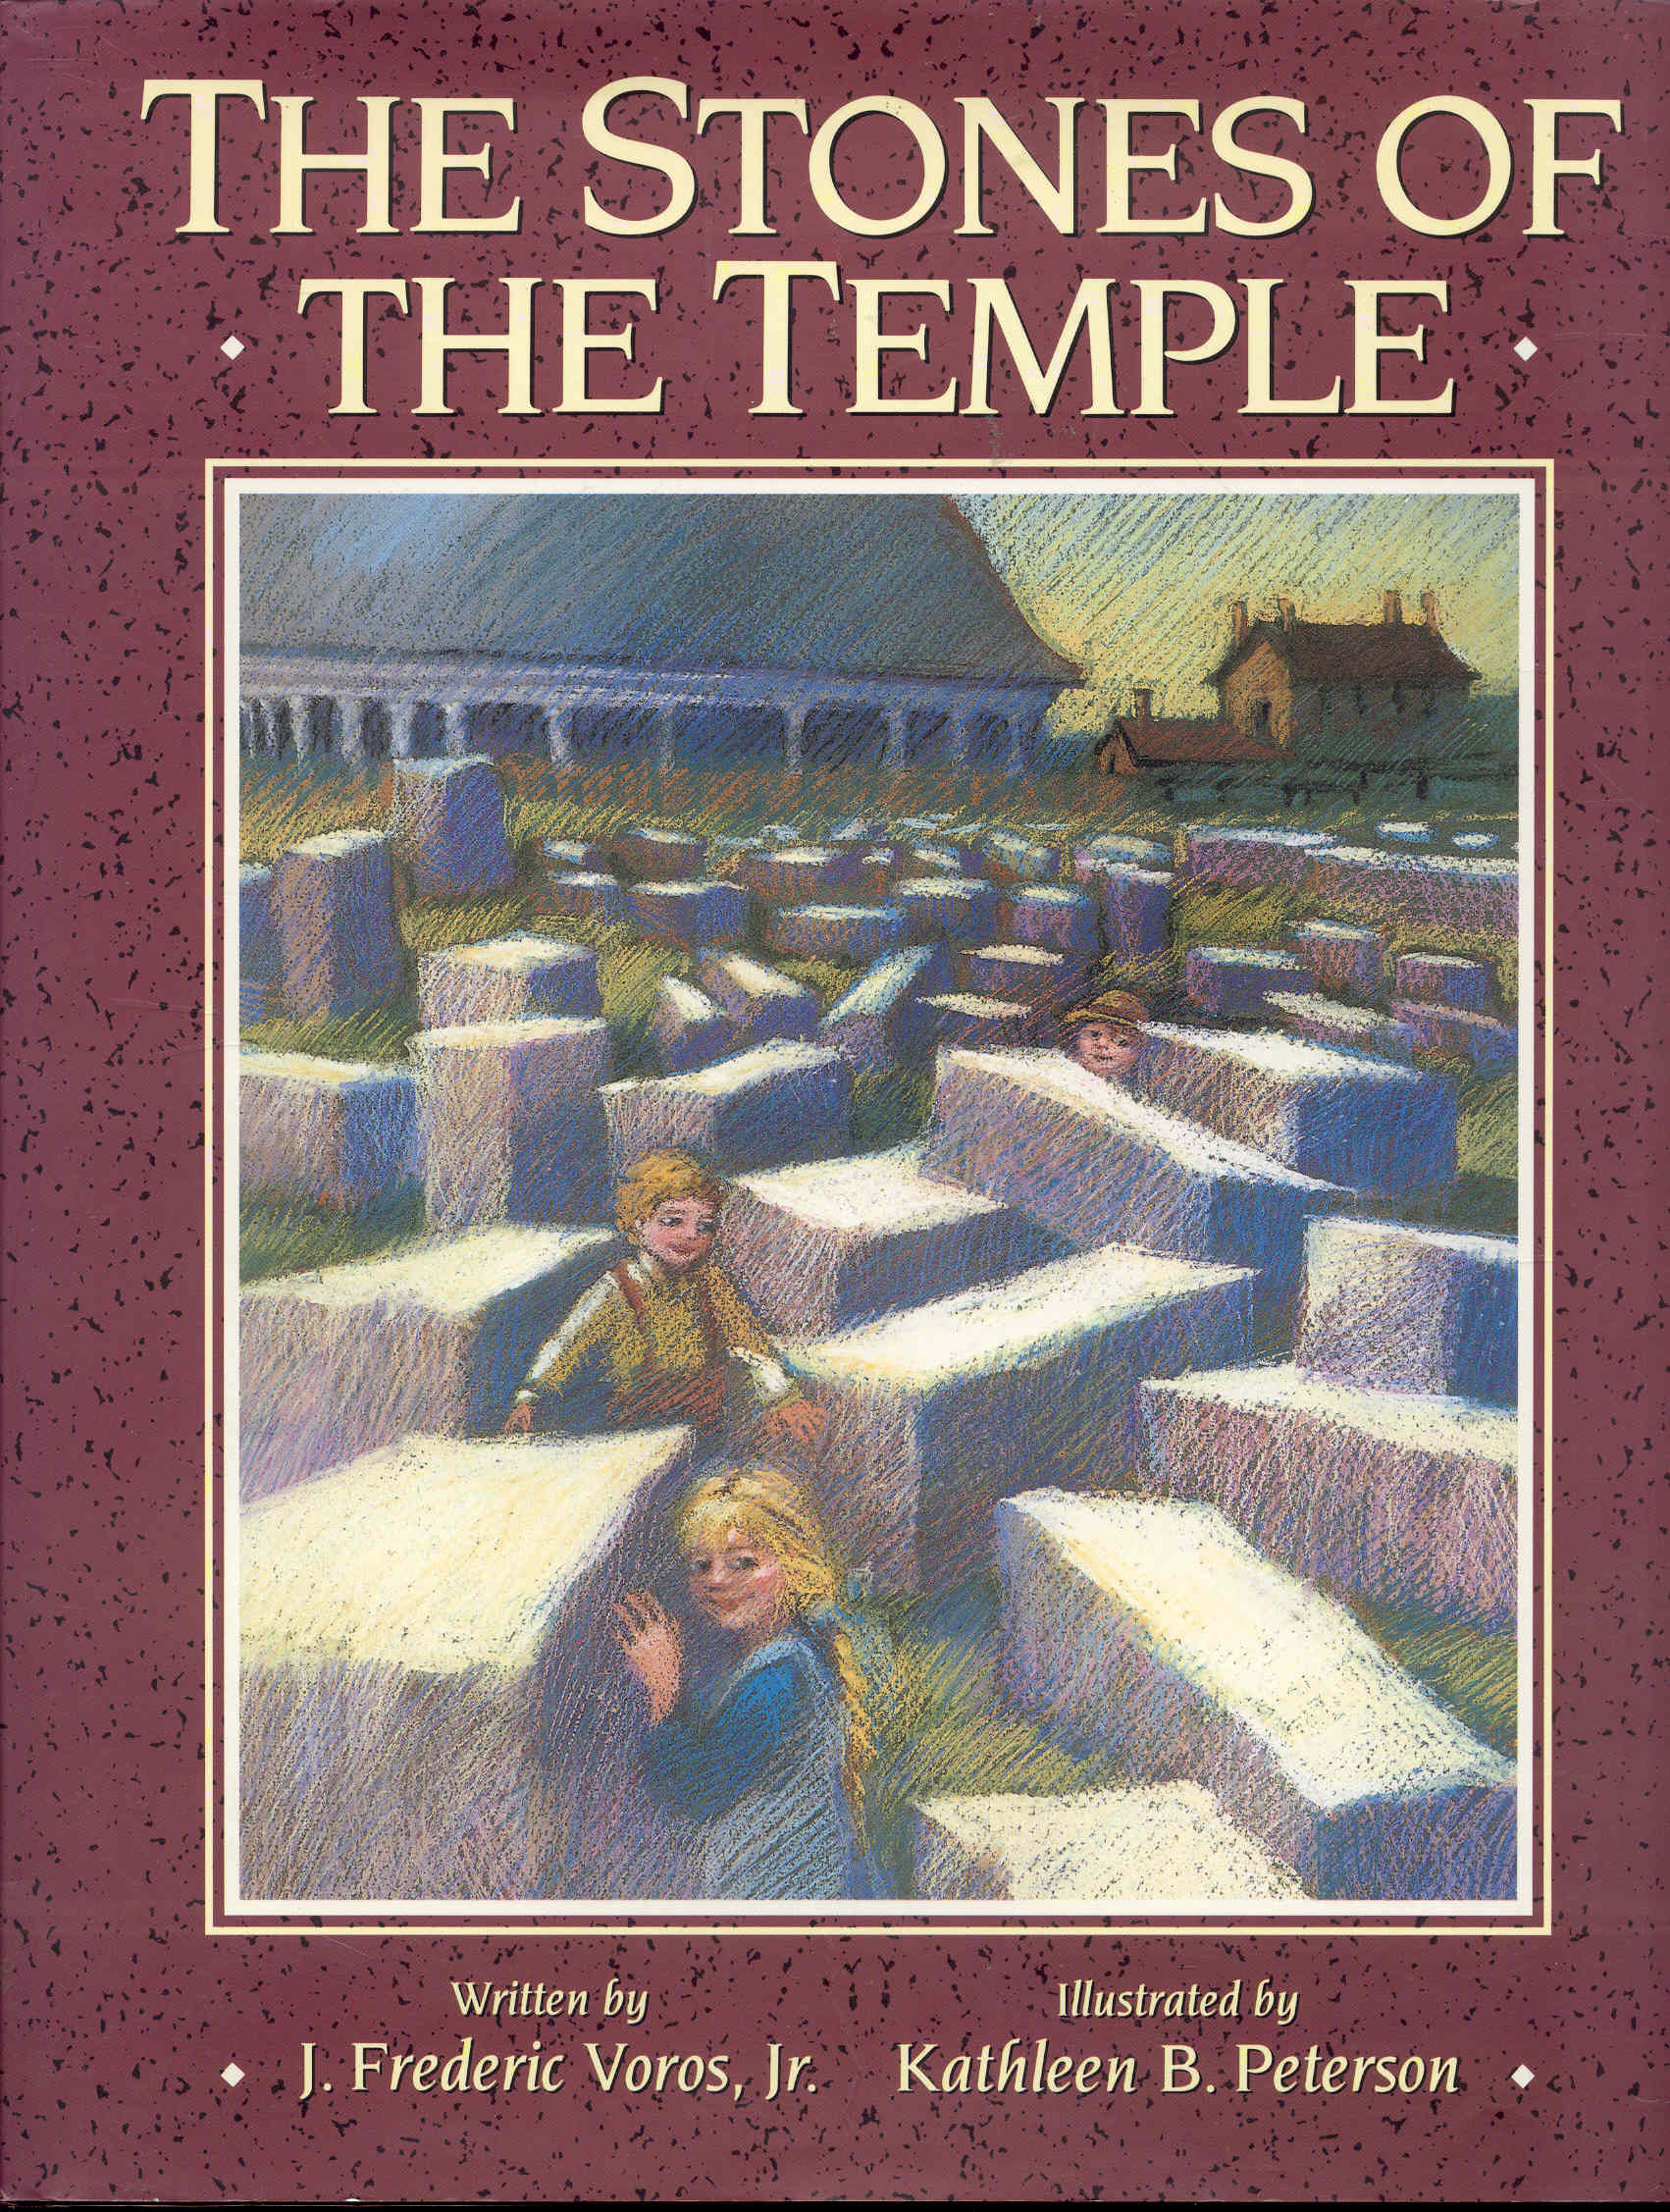 The Stones of the Temple - J. Frederic Voros Jr.